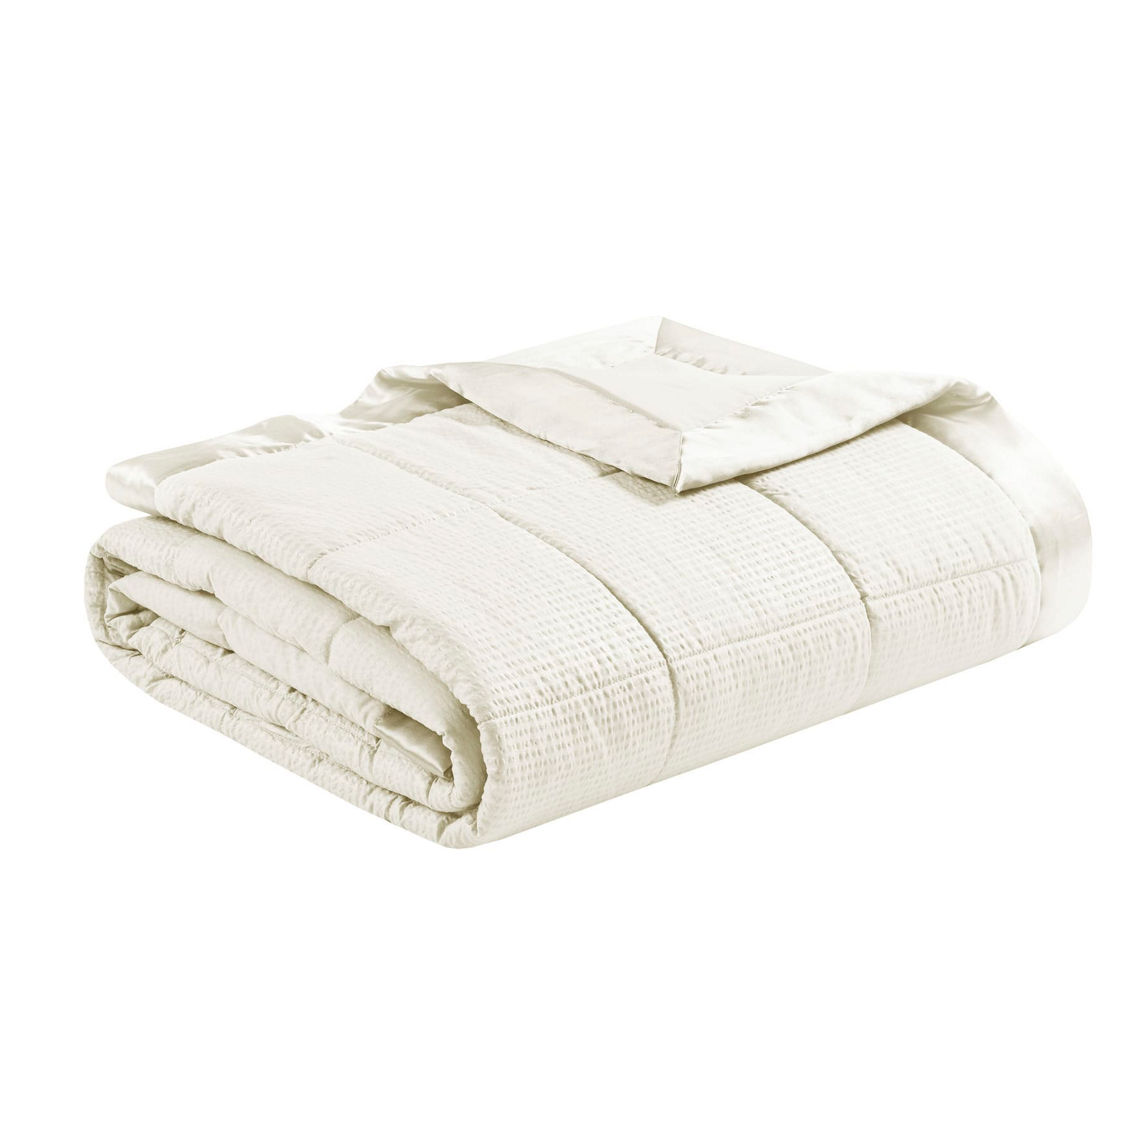 Madison Park Campbell Reversible HeiQ Smart Temperature Down Alternative Blanket - Image 3 of 5